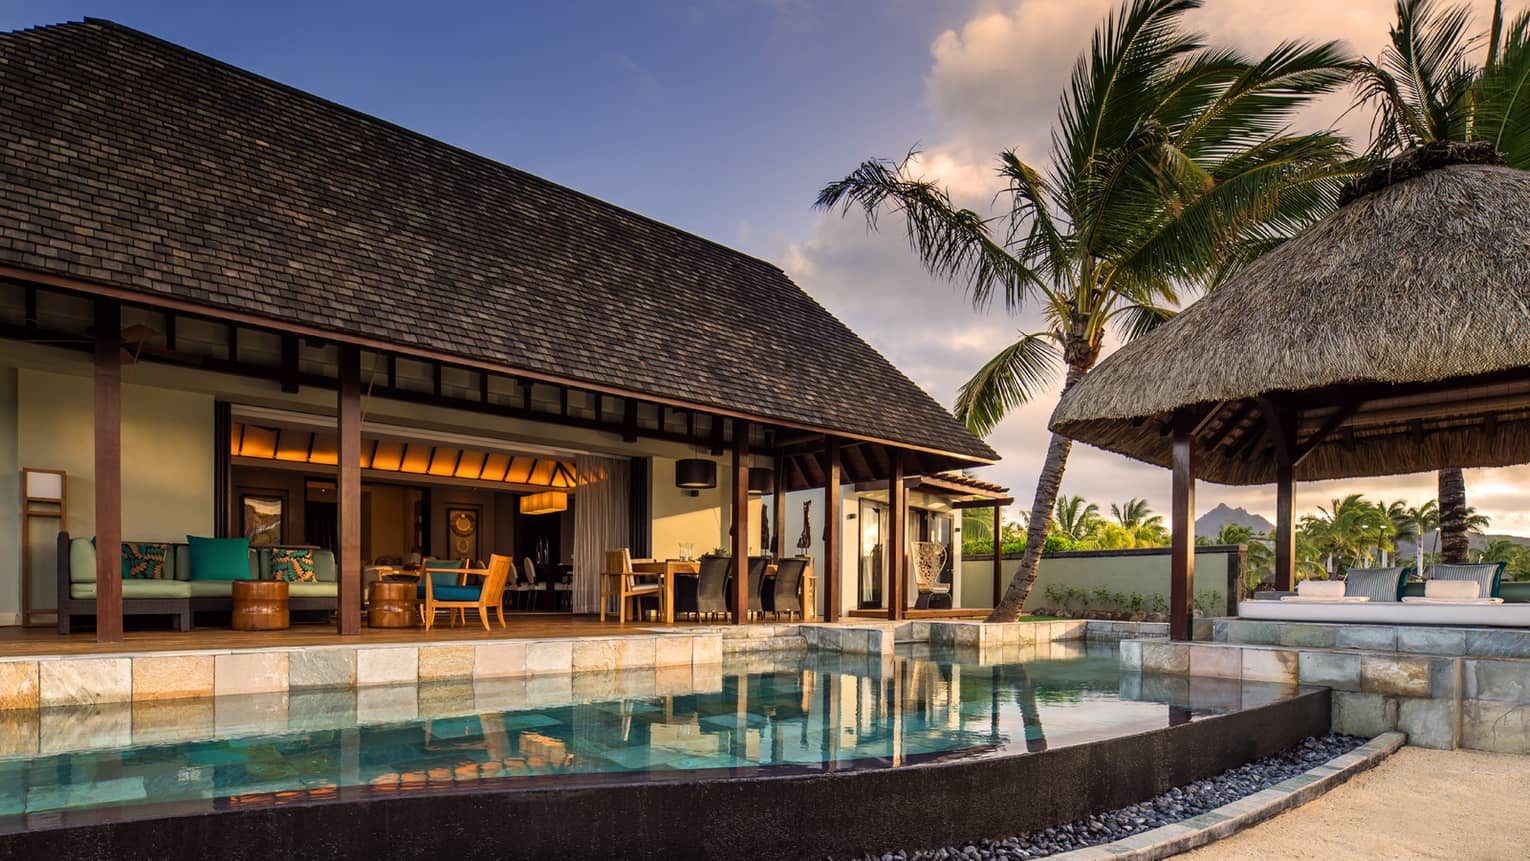 Private villa in tropical setting with private pool, terrace and thatched-roof pavilion